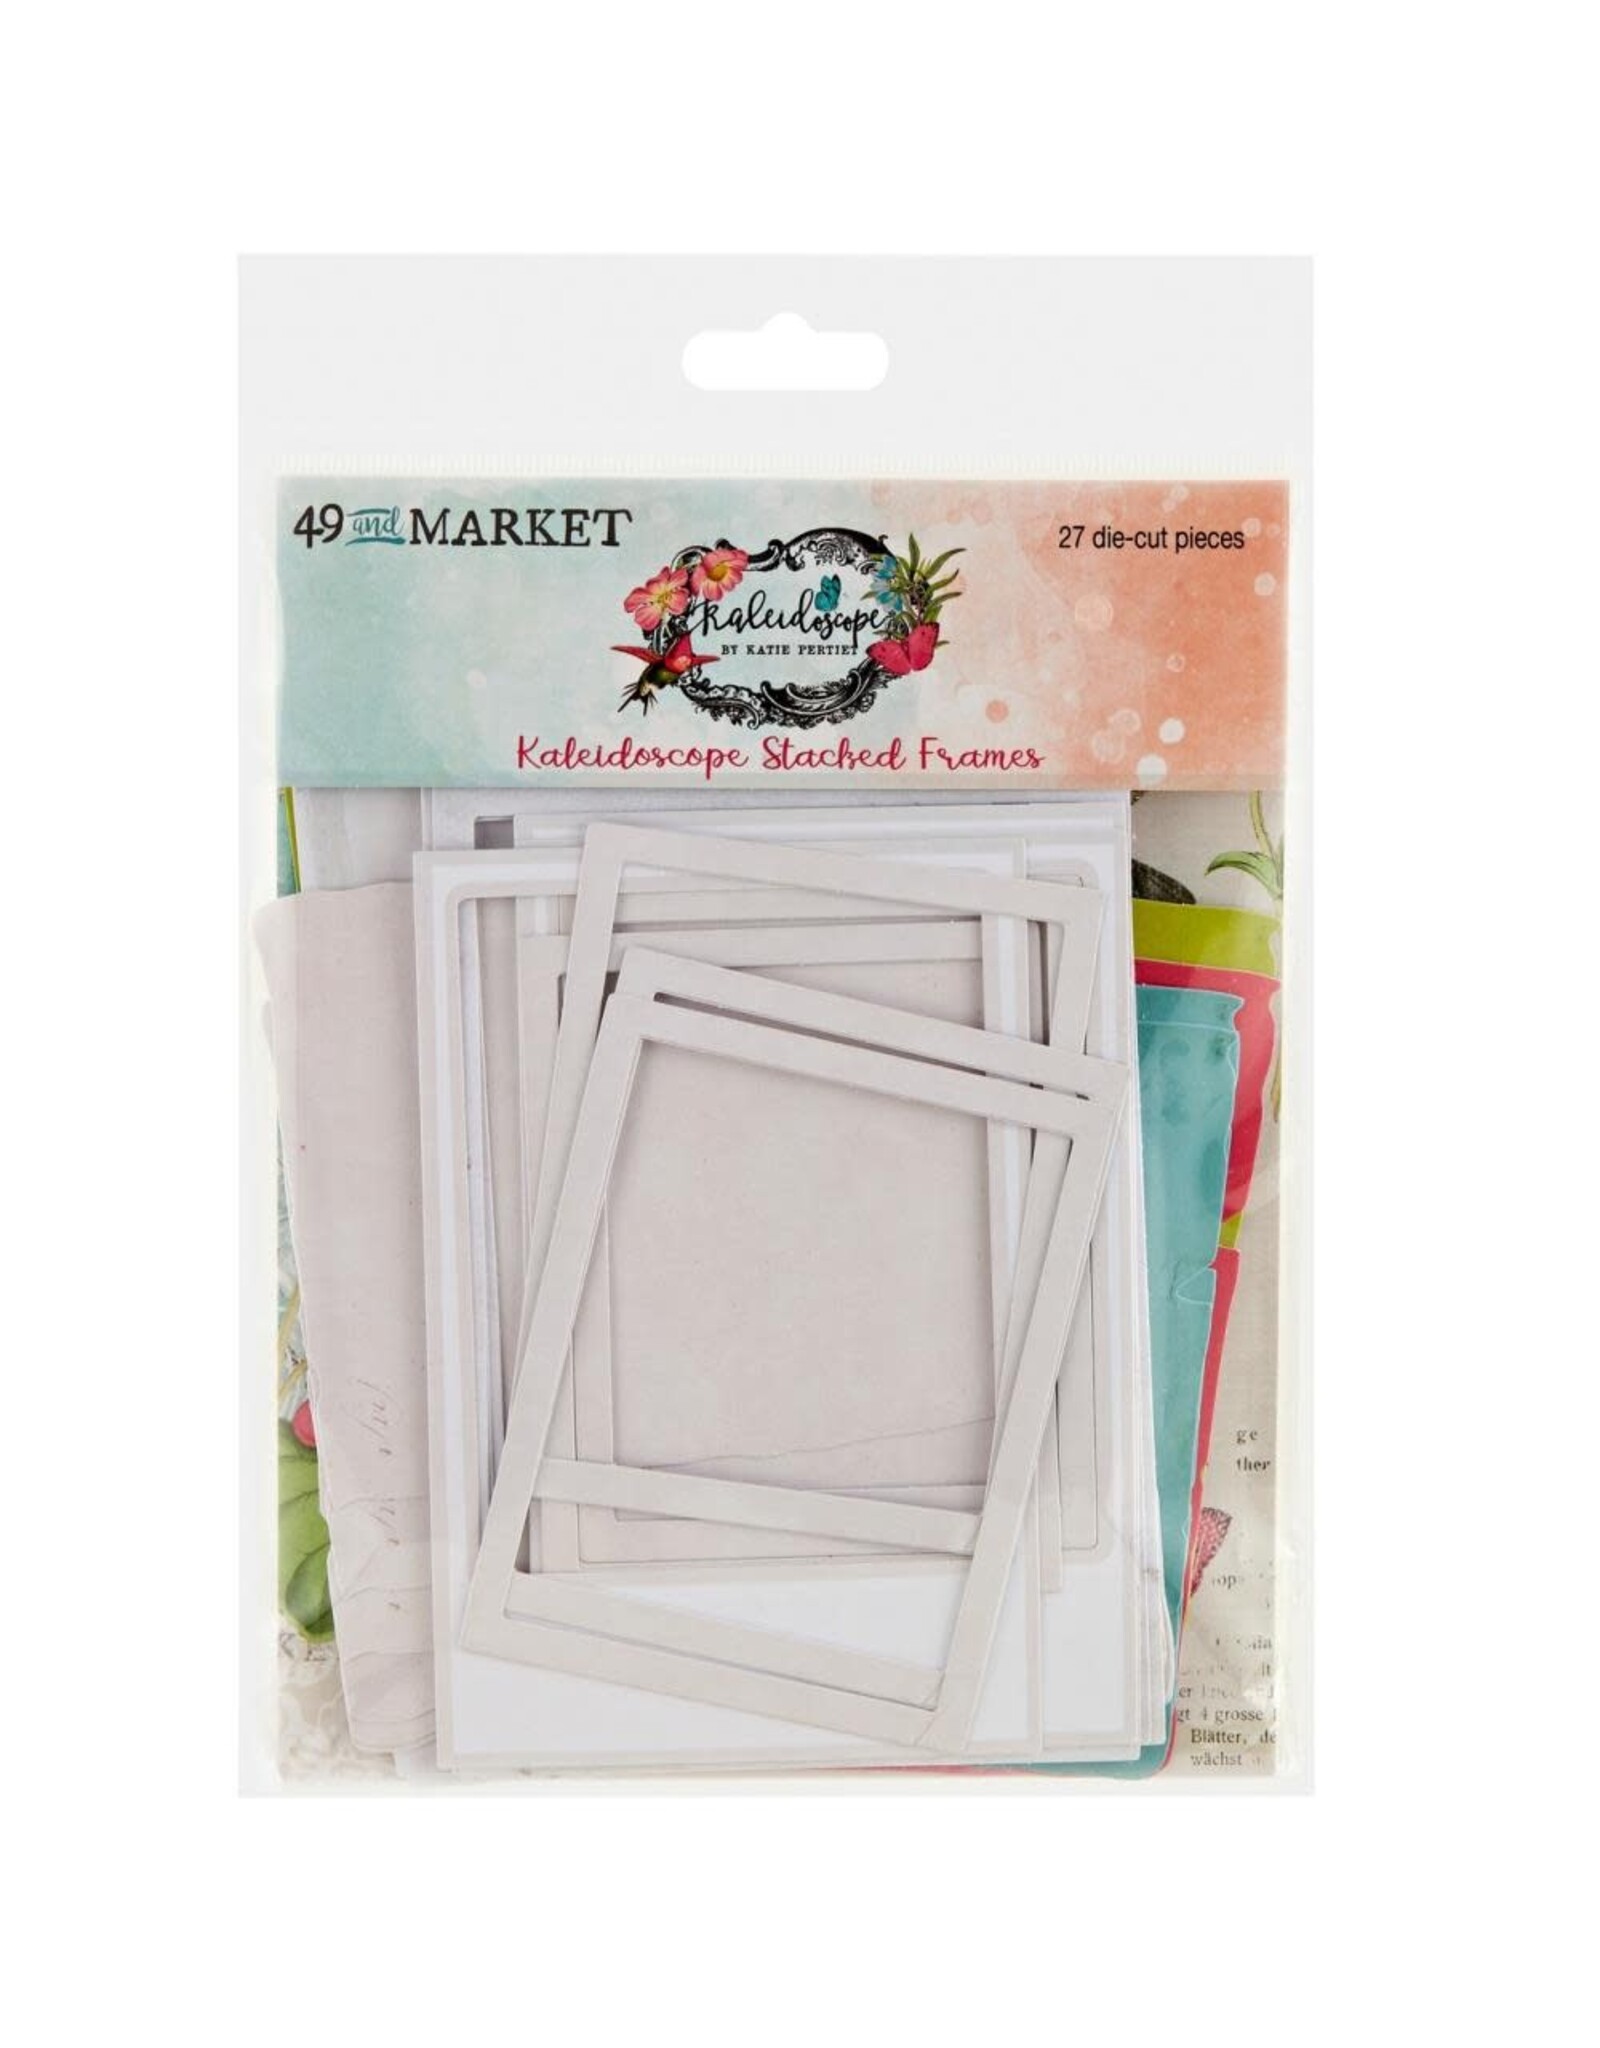 49 AND MARKET Kaleidoscope Chipboard Stacked Frames